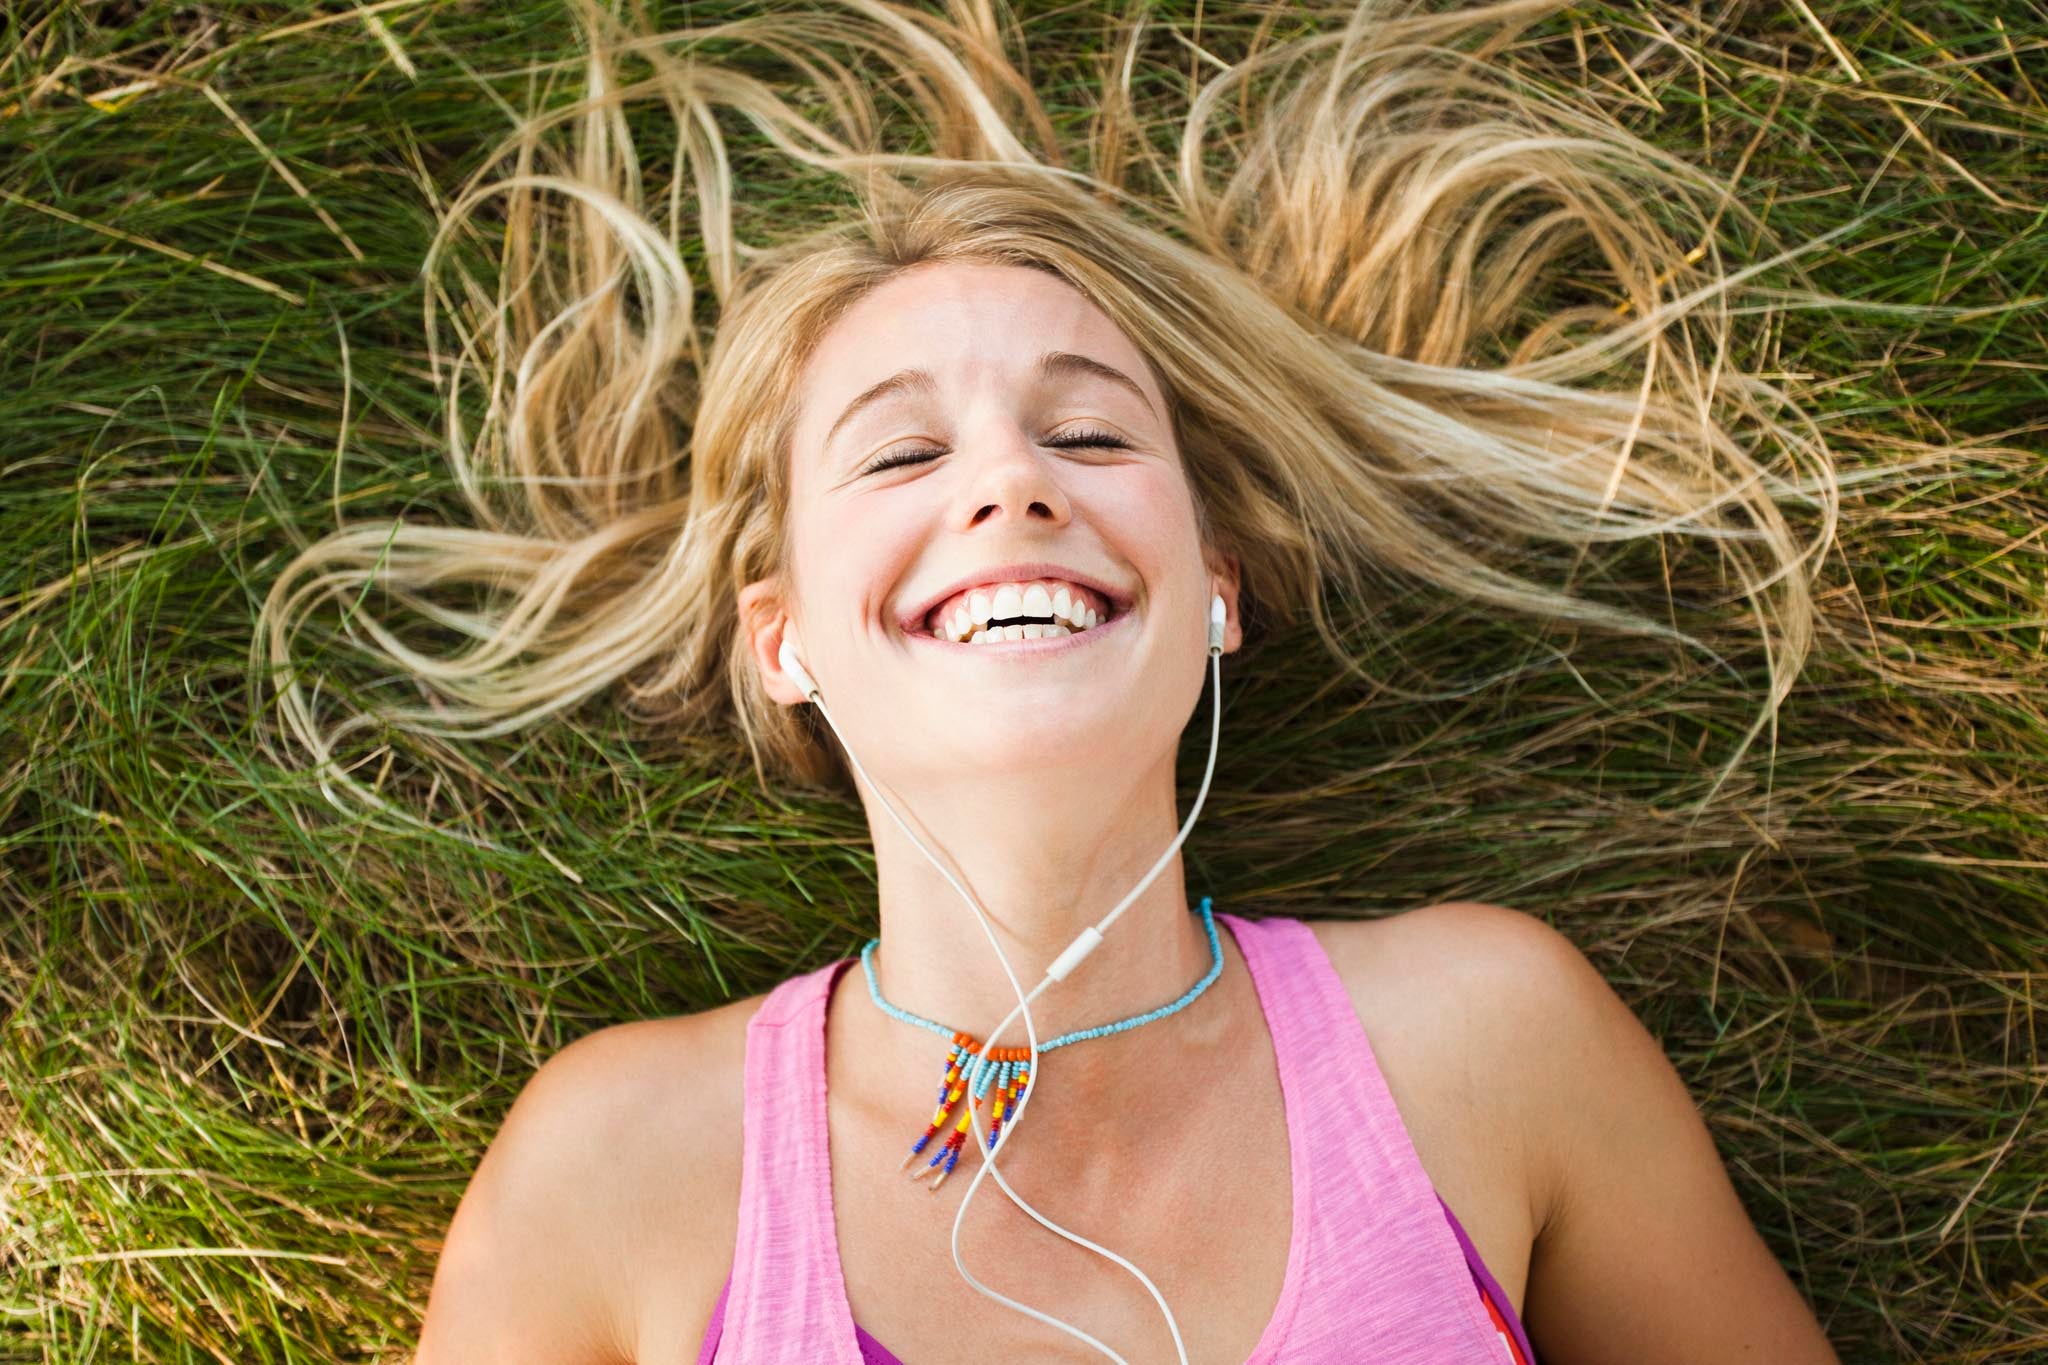 Can music make you happy?